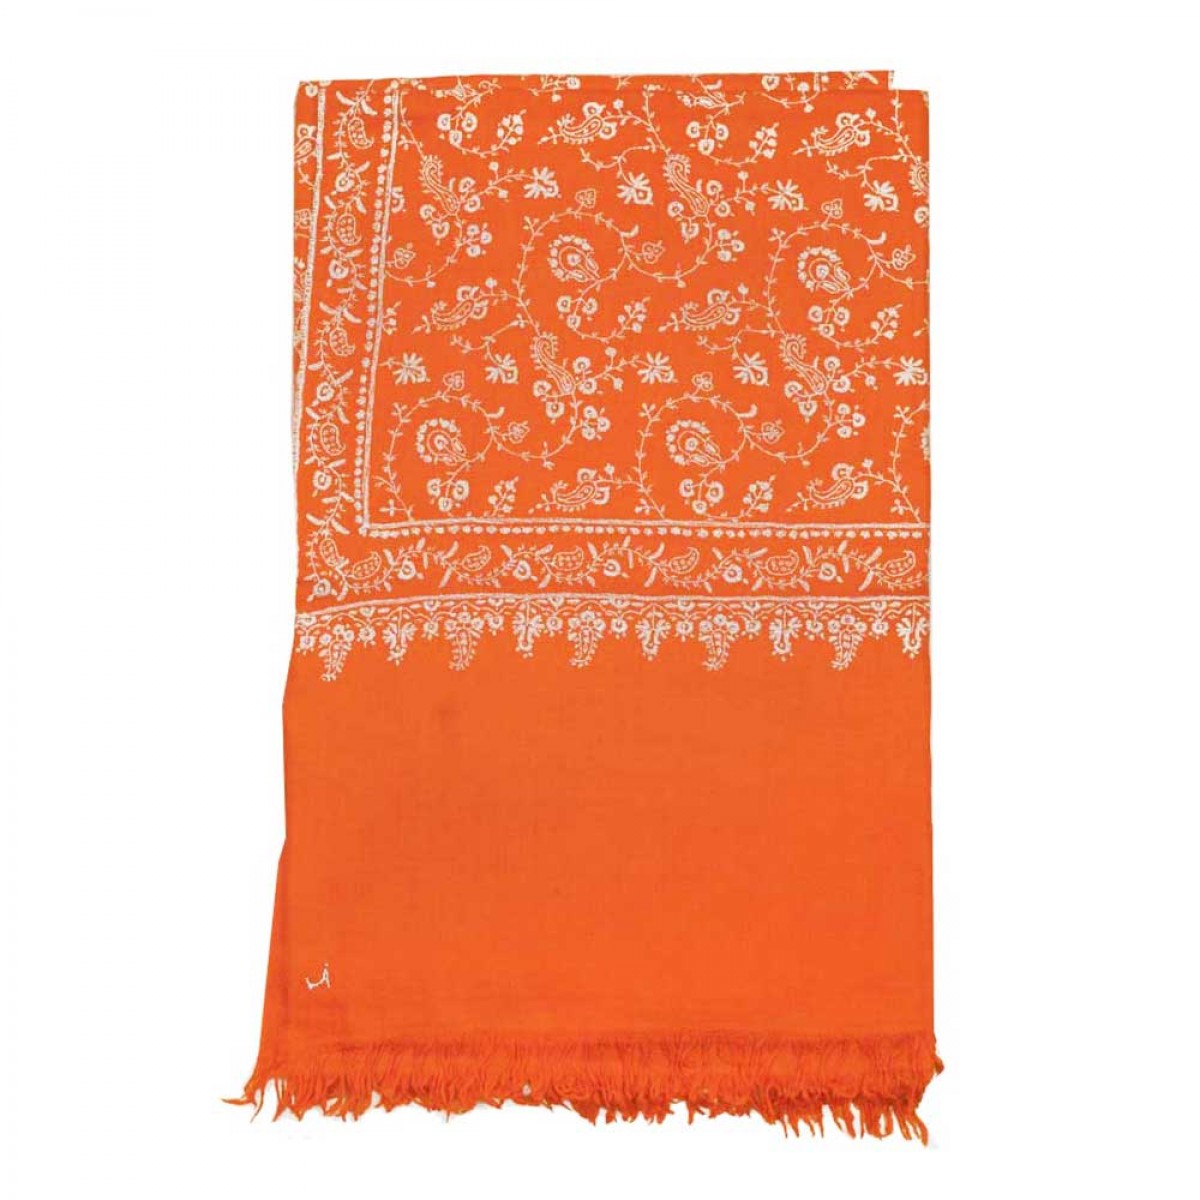 Embroidered Pashmina Shawls - Coral